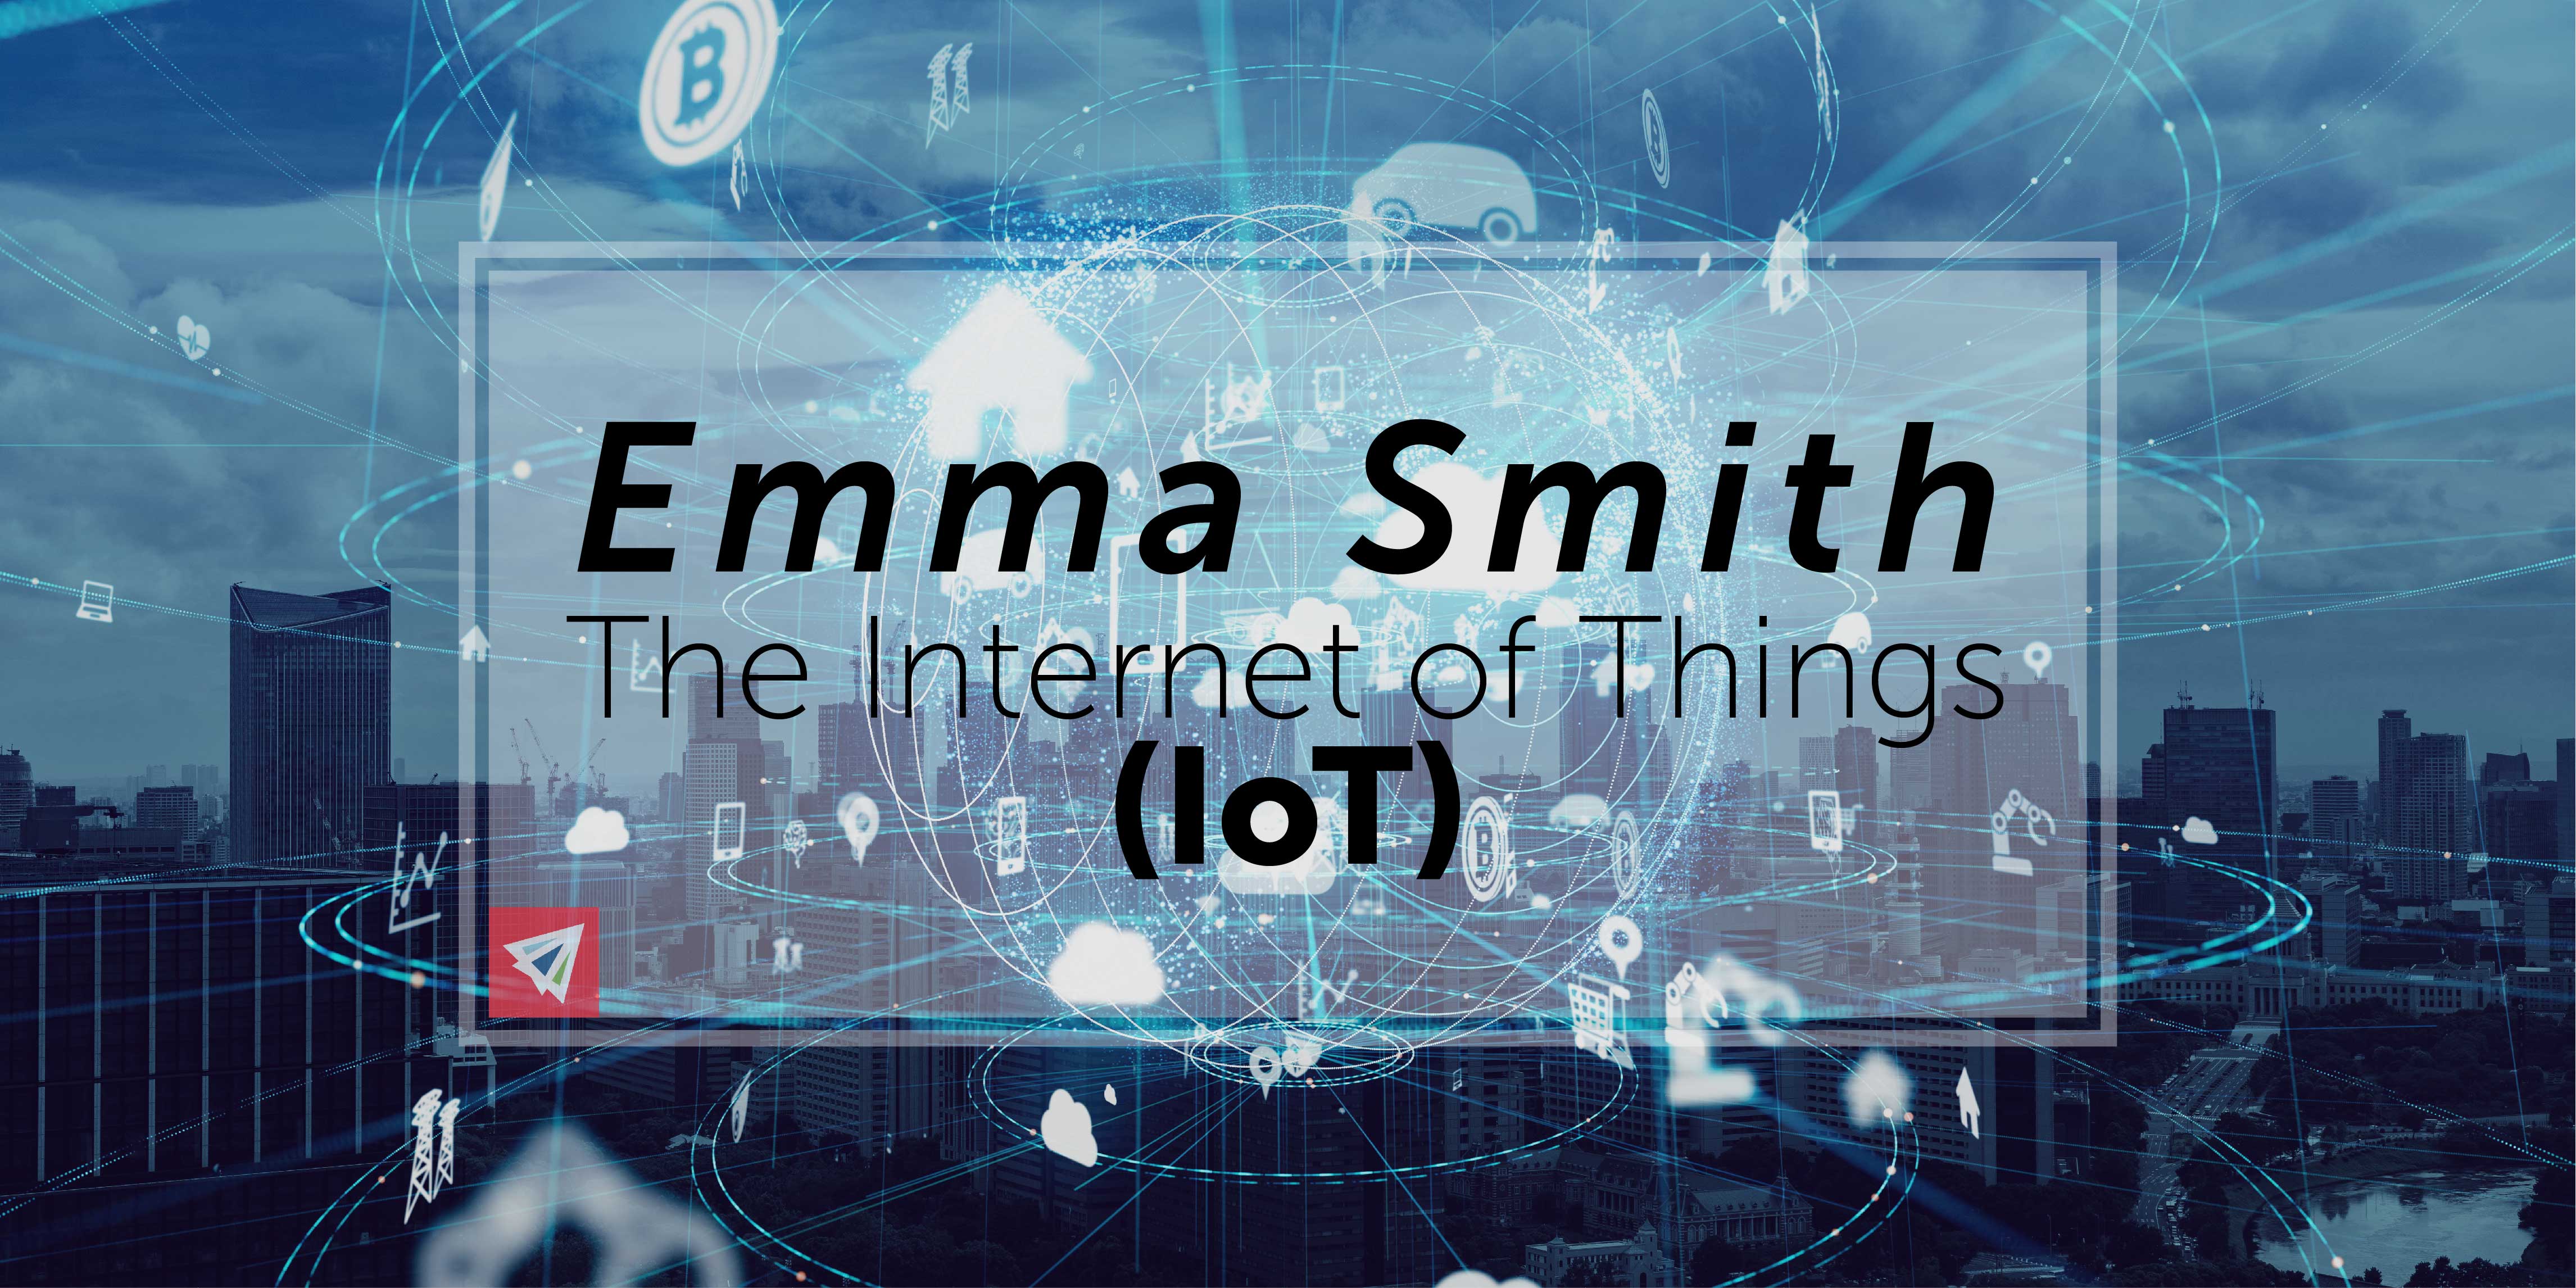 The Internet of Things (Iot) - Emma Smith